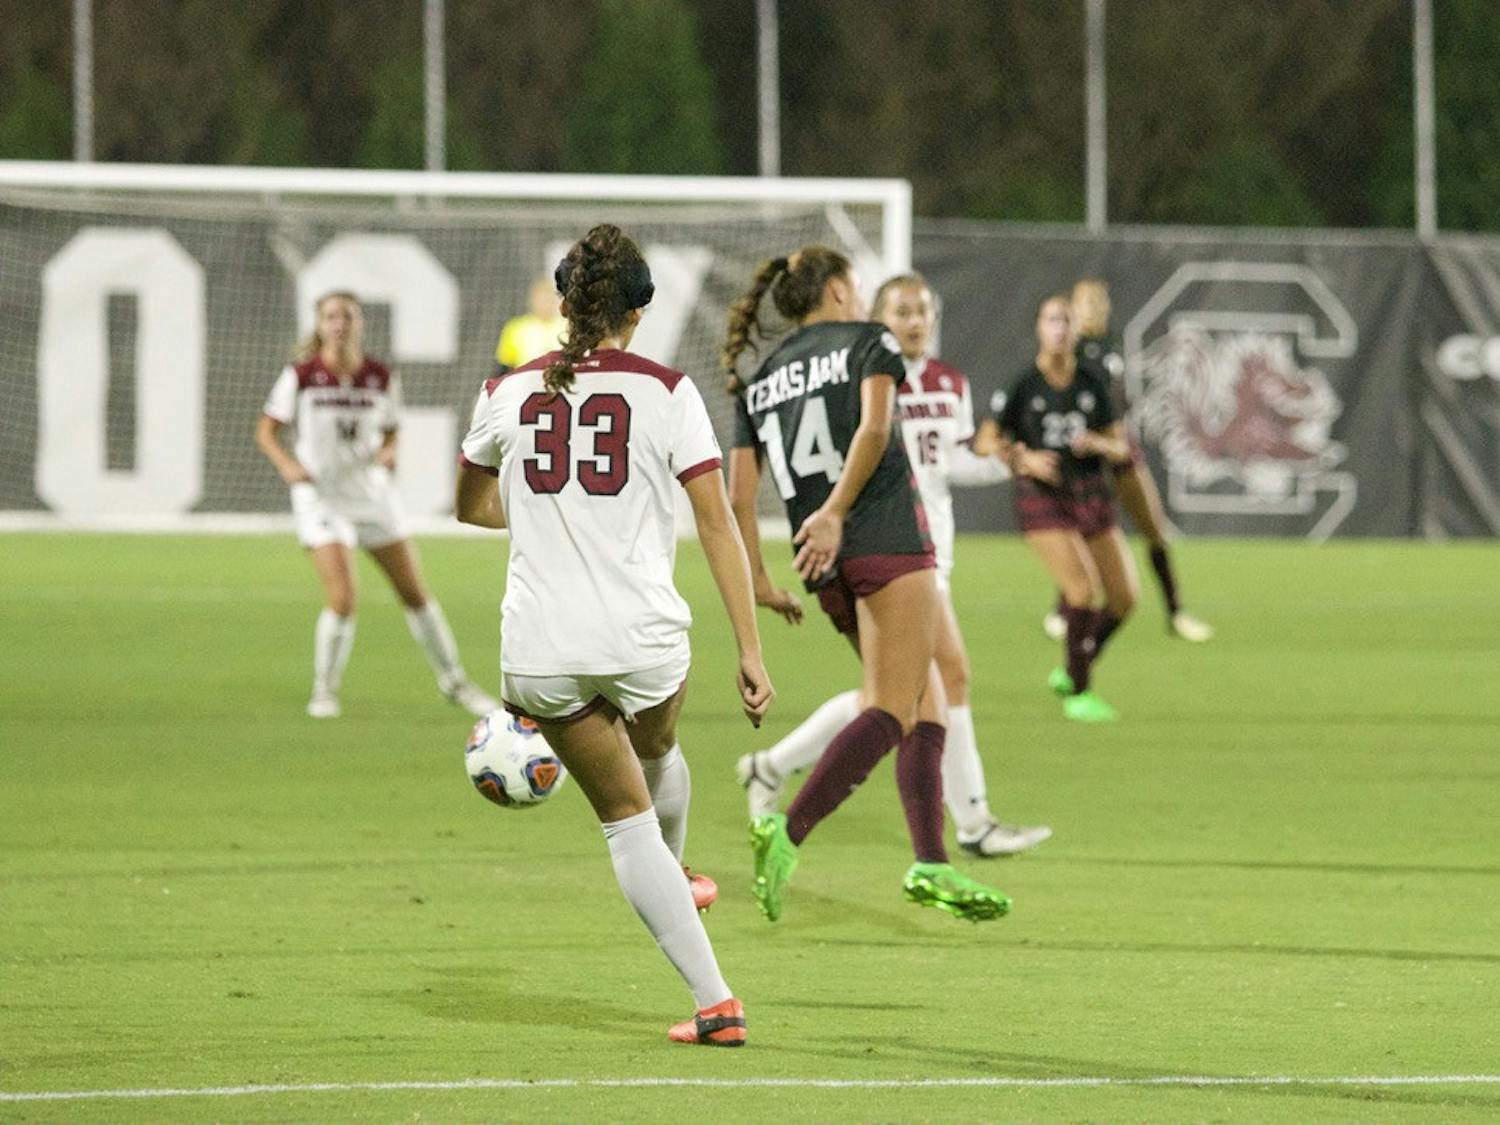 The South Carolina women's soccer team battled against Texas in a SEC matchup on Oct. 20, 2022. After a slow start and a dominant defensive showing from both teams, South Carolina tied with Texas A&amp;M 1-1. Photos captured by Erica Hudock | The Daily Gamecock